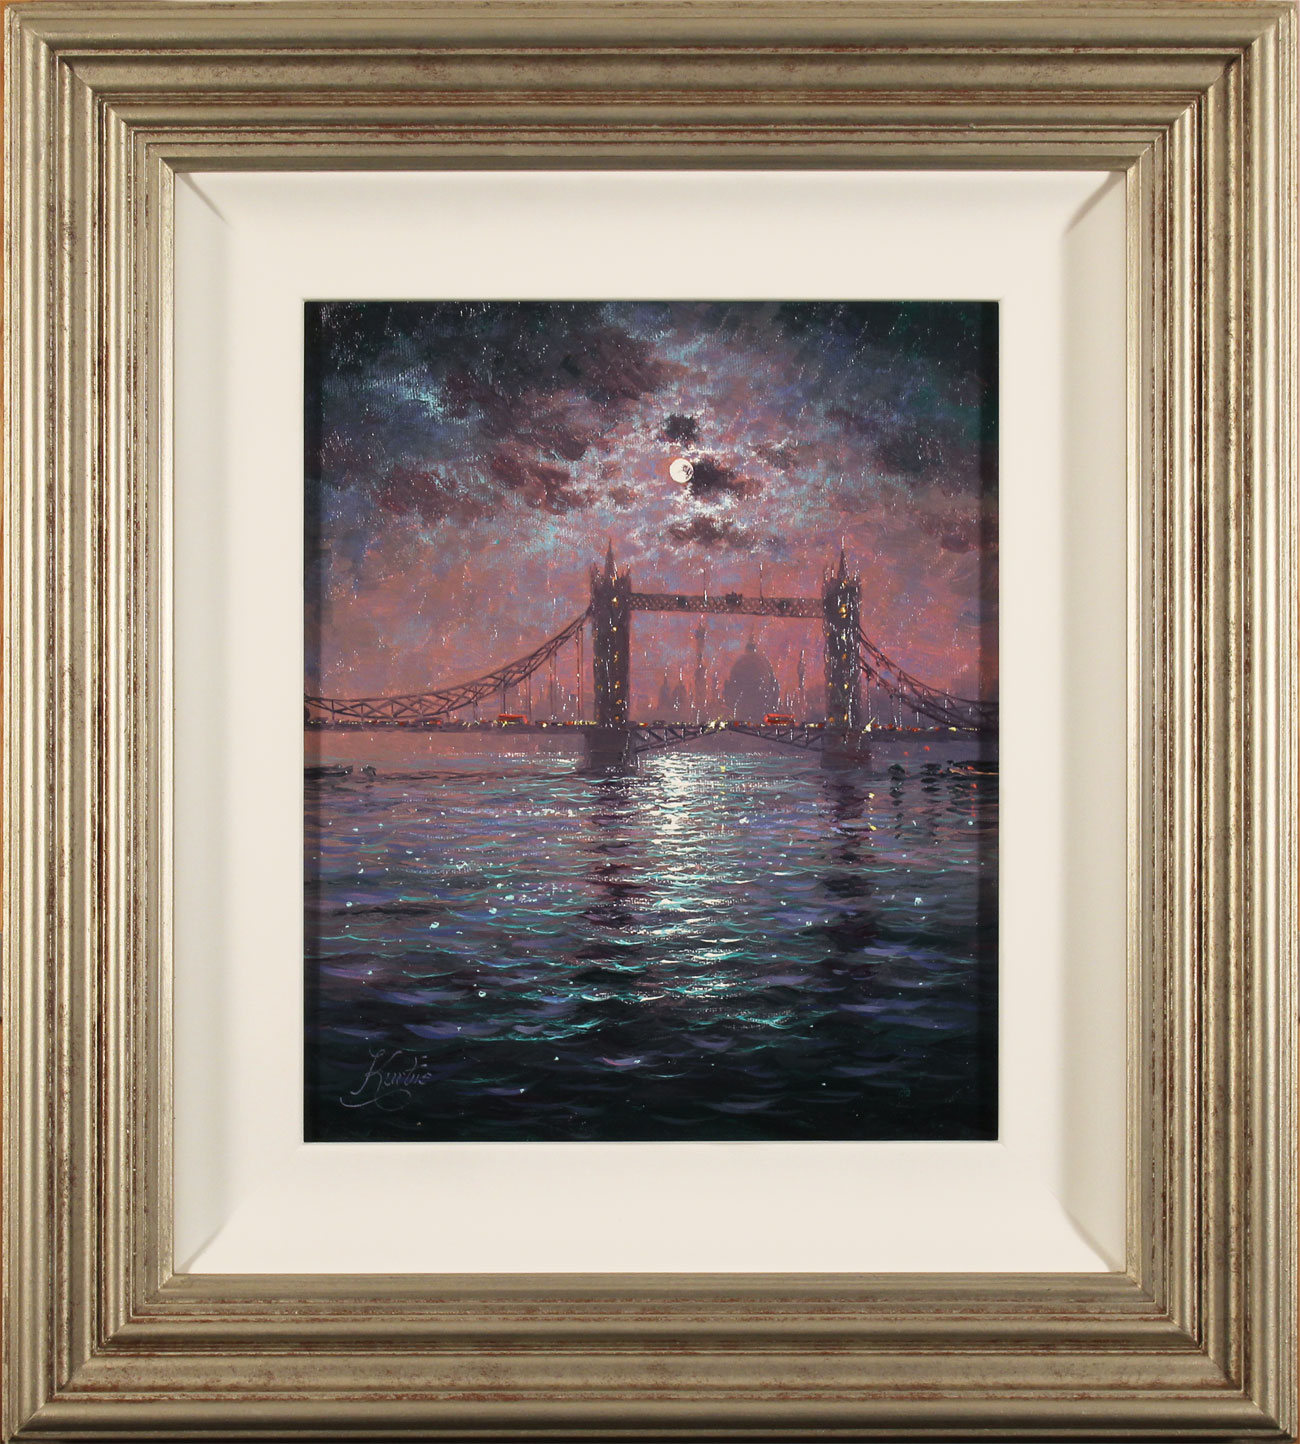 Andrew Grant Kurtis, Original oil painting on canvas, Tower Bridge by Moonlight. Click to enlarge